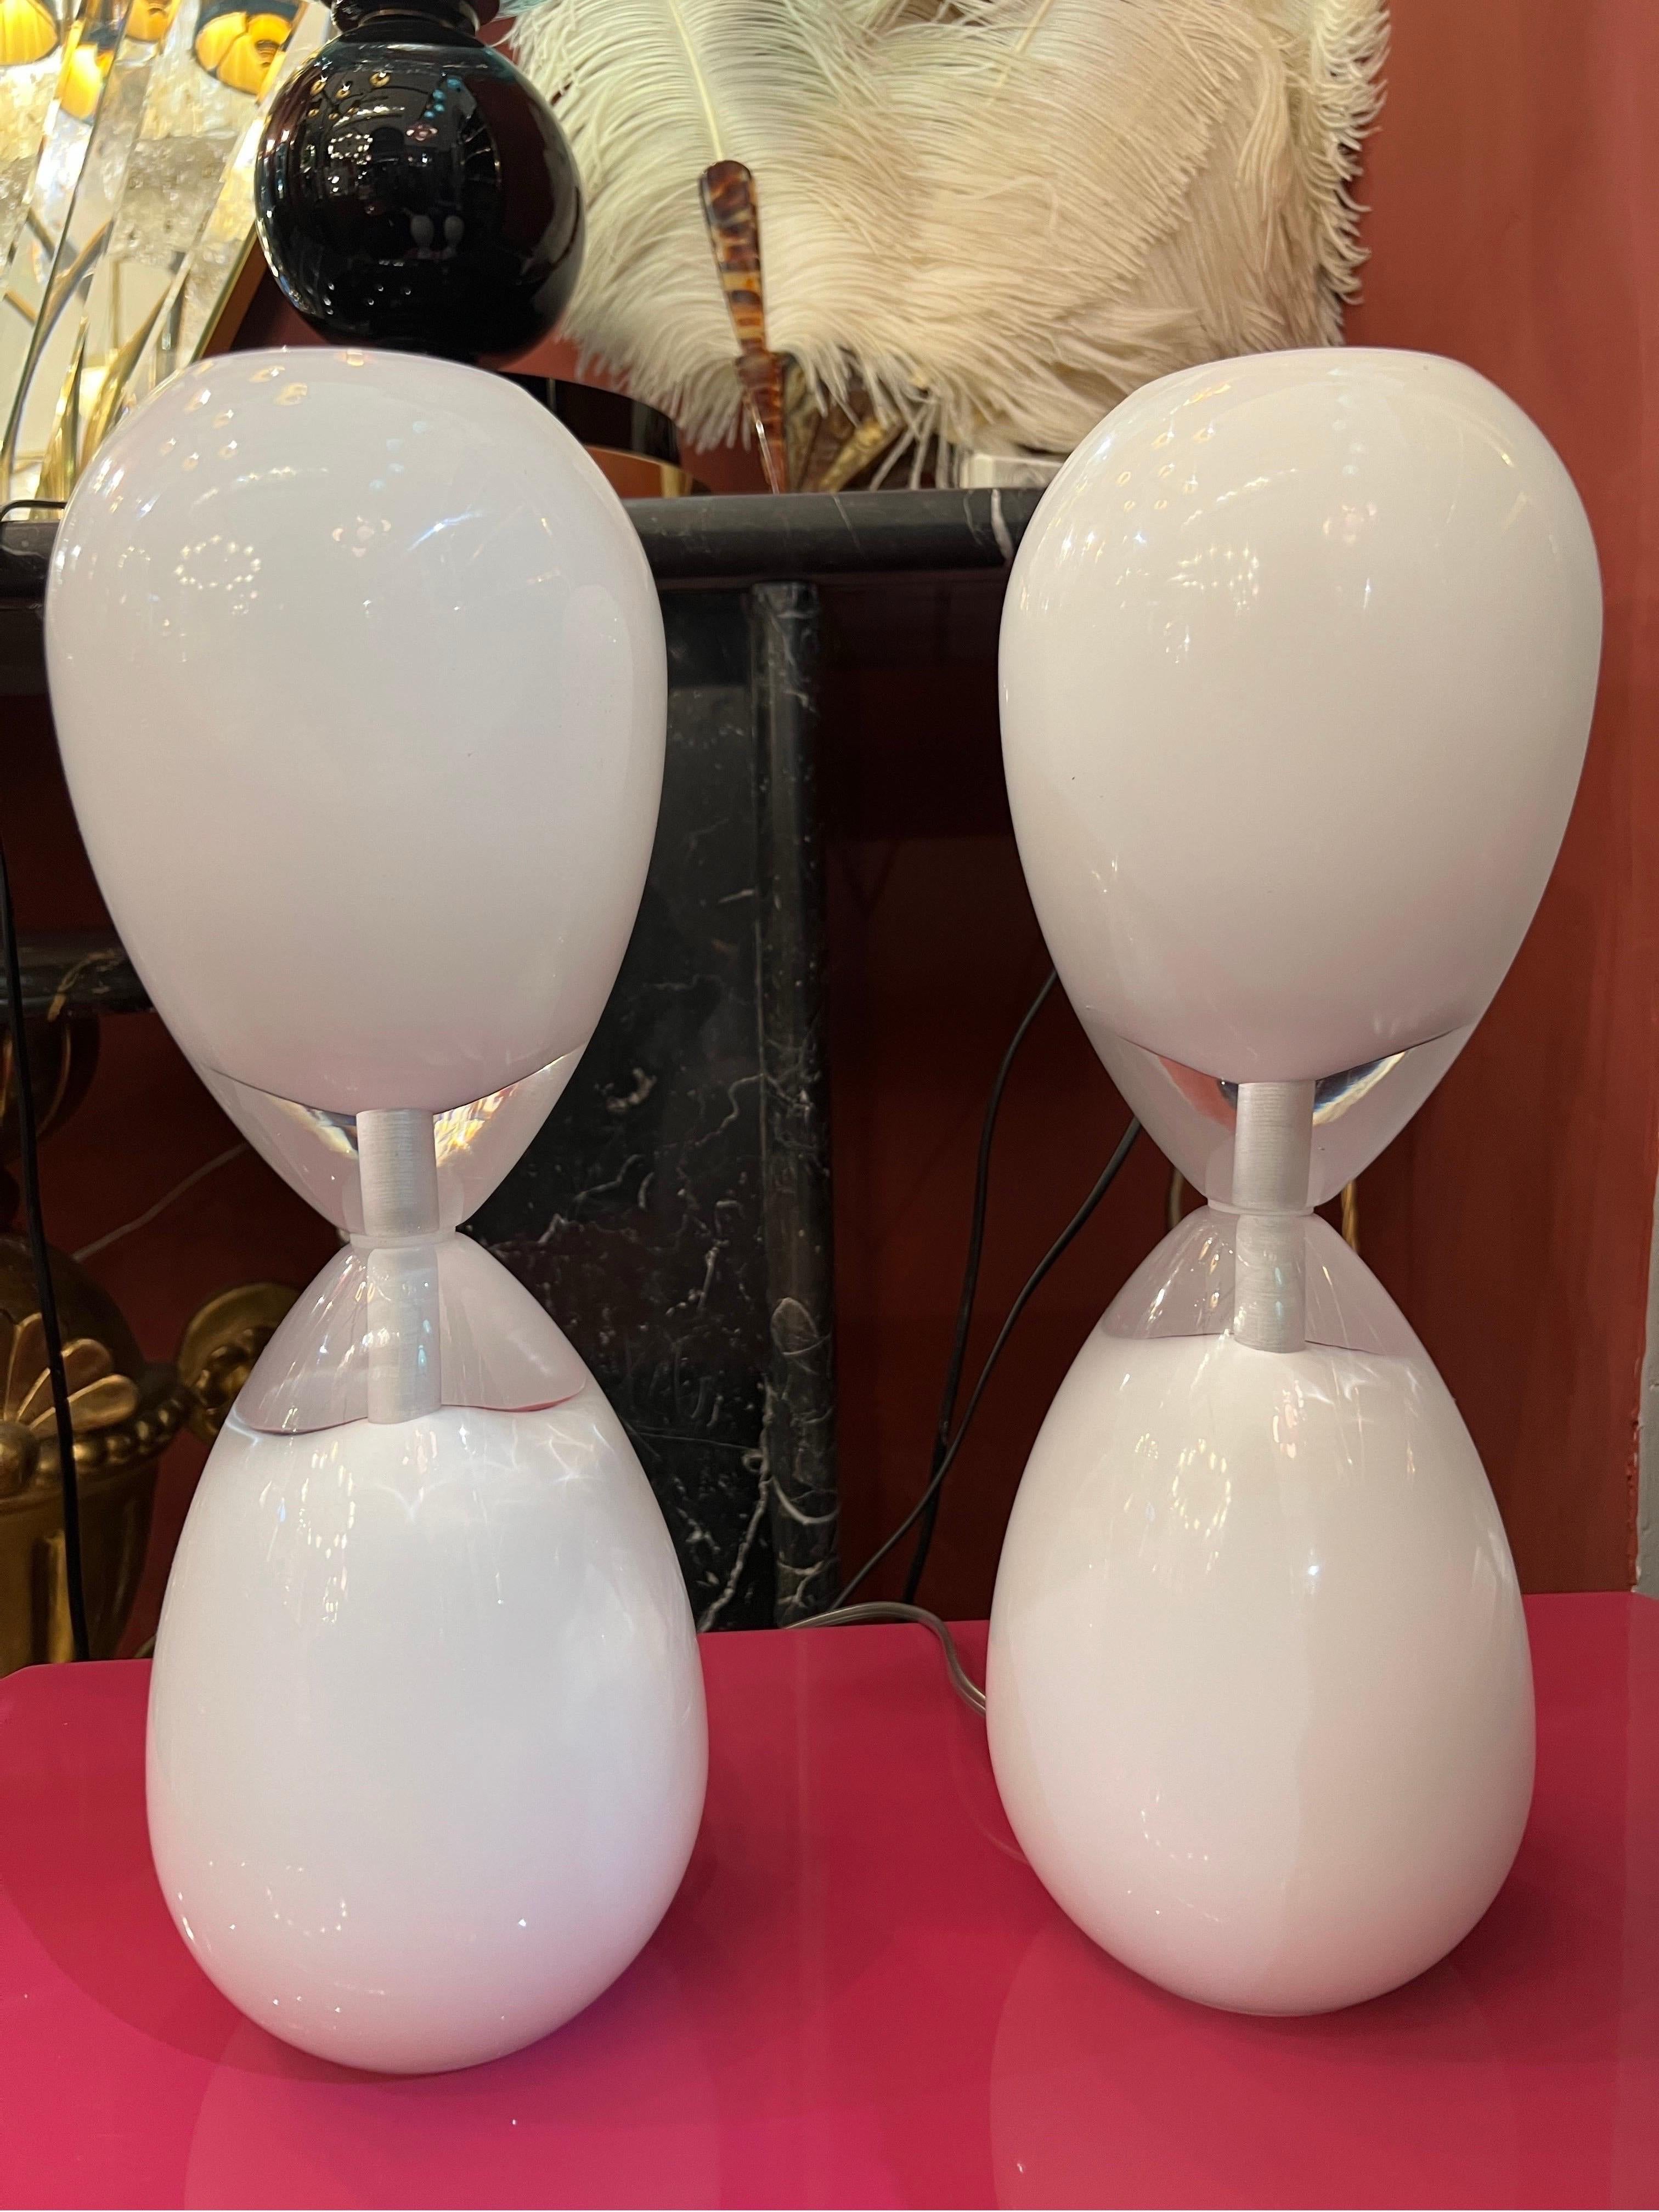 Pair of white hourglass shaped Murano Glass table lamps. 
Italian Vintage design midcentury era.
One bulb each lamp.